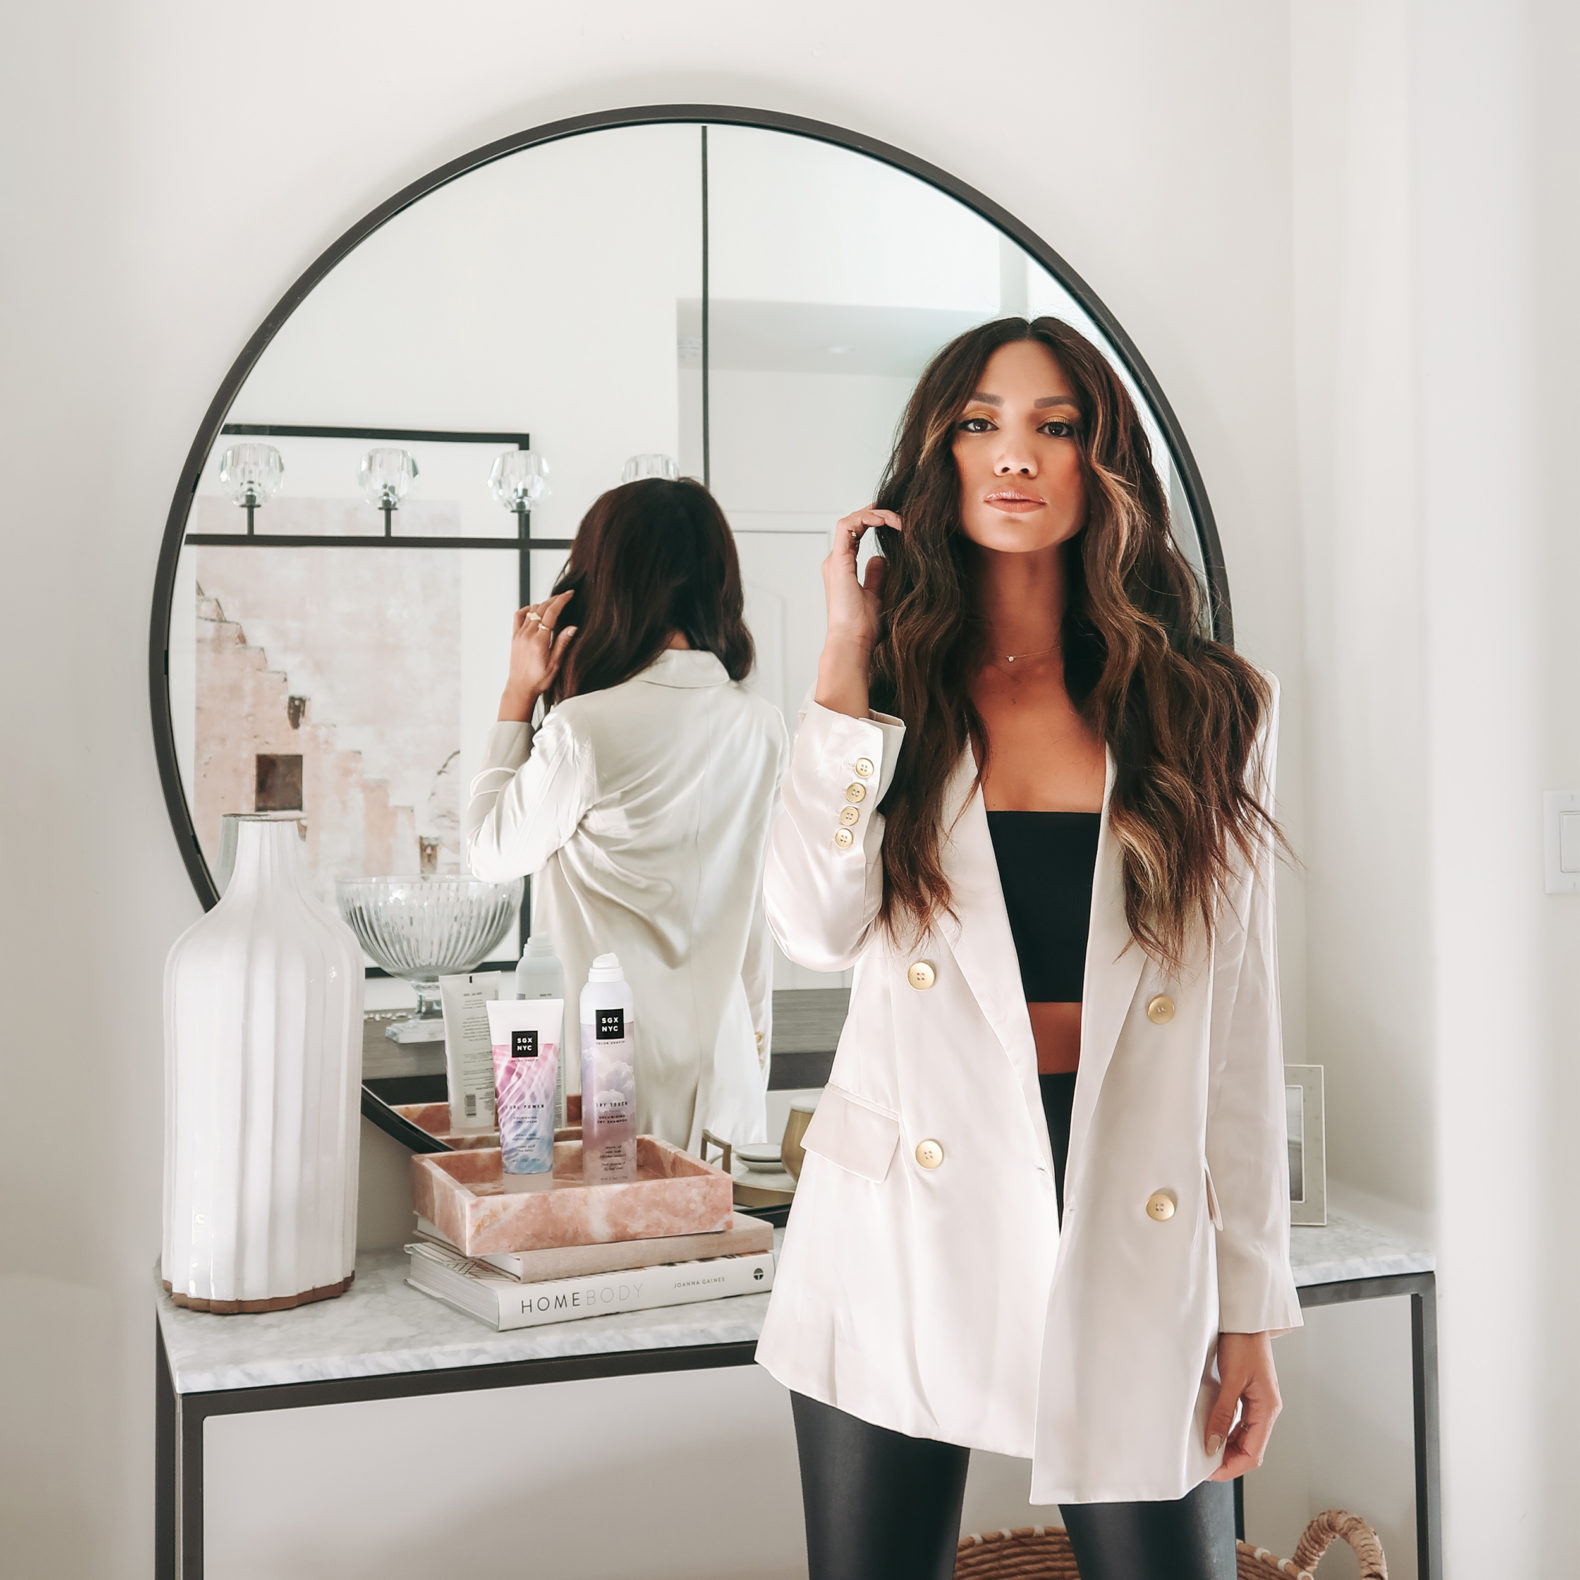 Female presenting influencer posing for the camera in a sleek white blazer and leather black pants. She is confident and raises her hand to perfect her long brown hair that is styled in a middle part and she's wearing make-up that accentuates her strong features. She's in front of a mirror with a table with SGX NYC products.